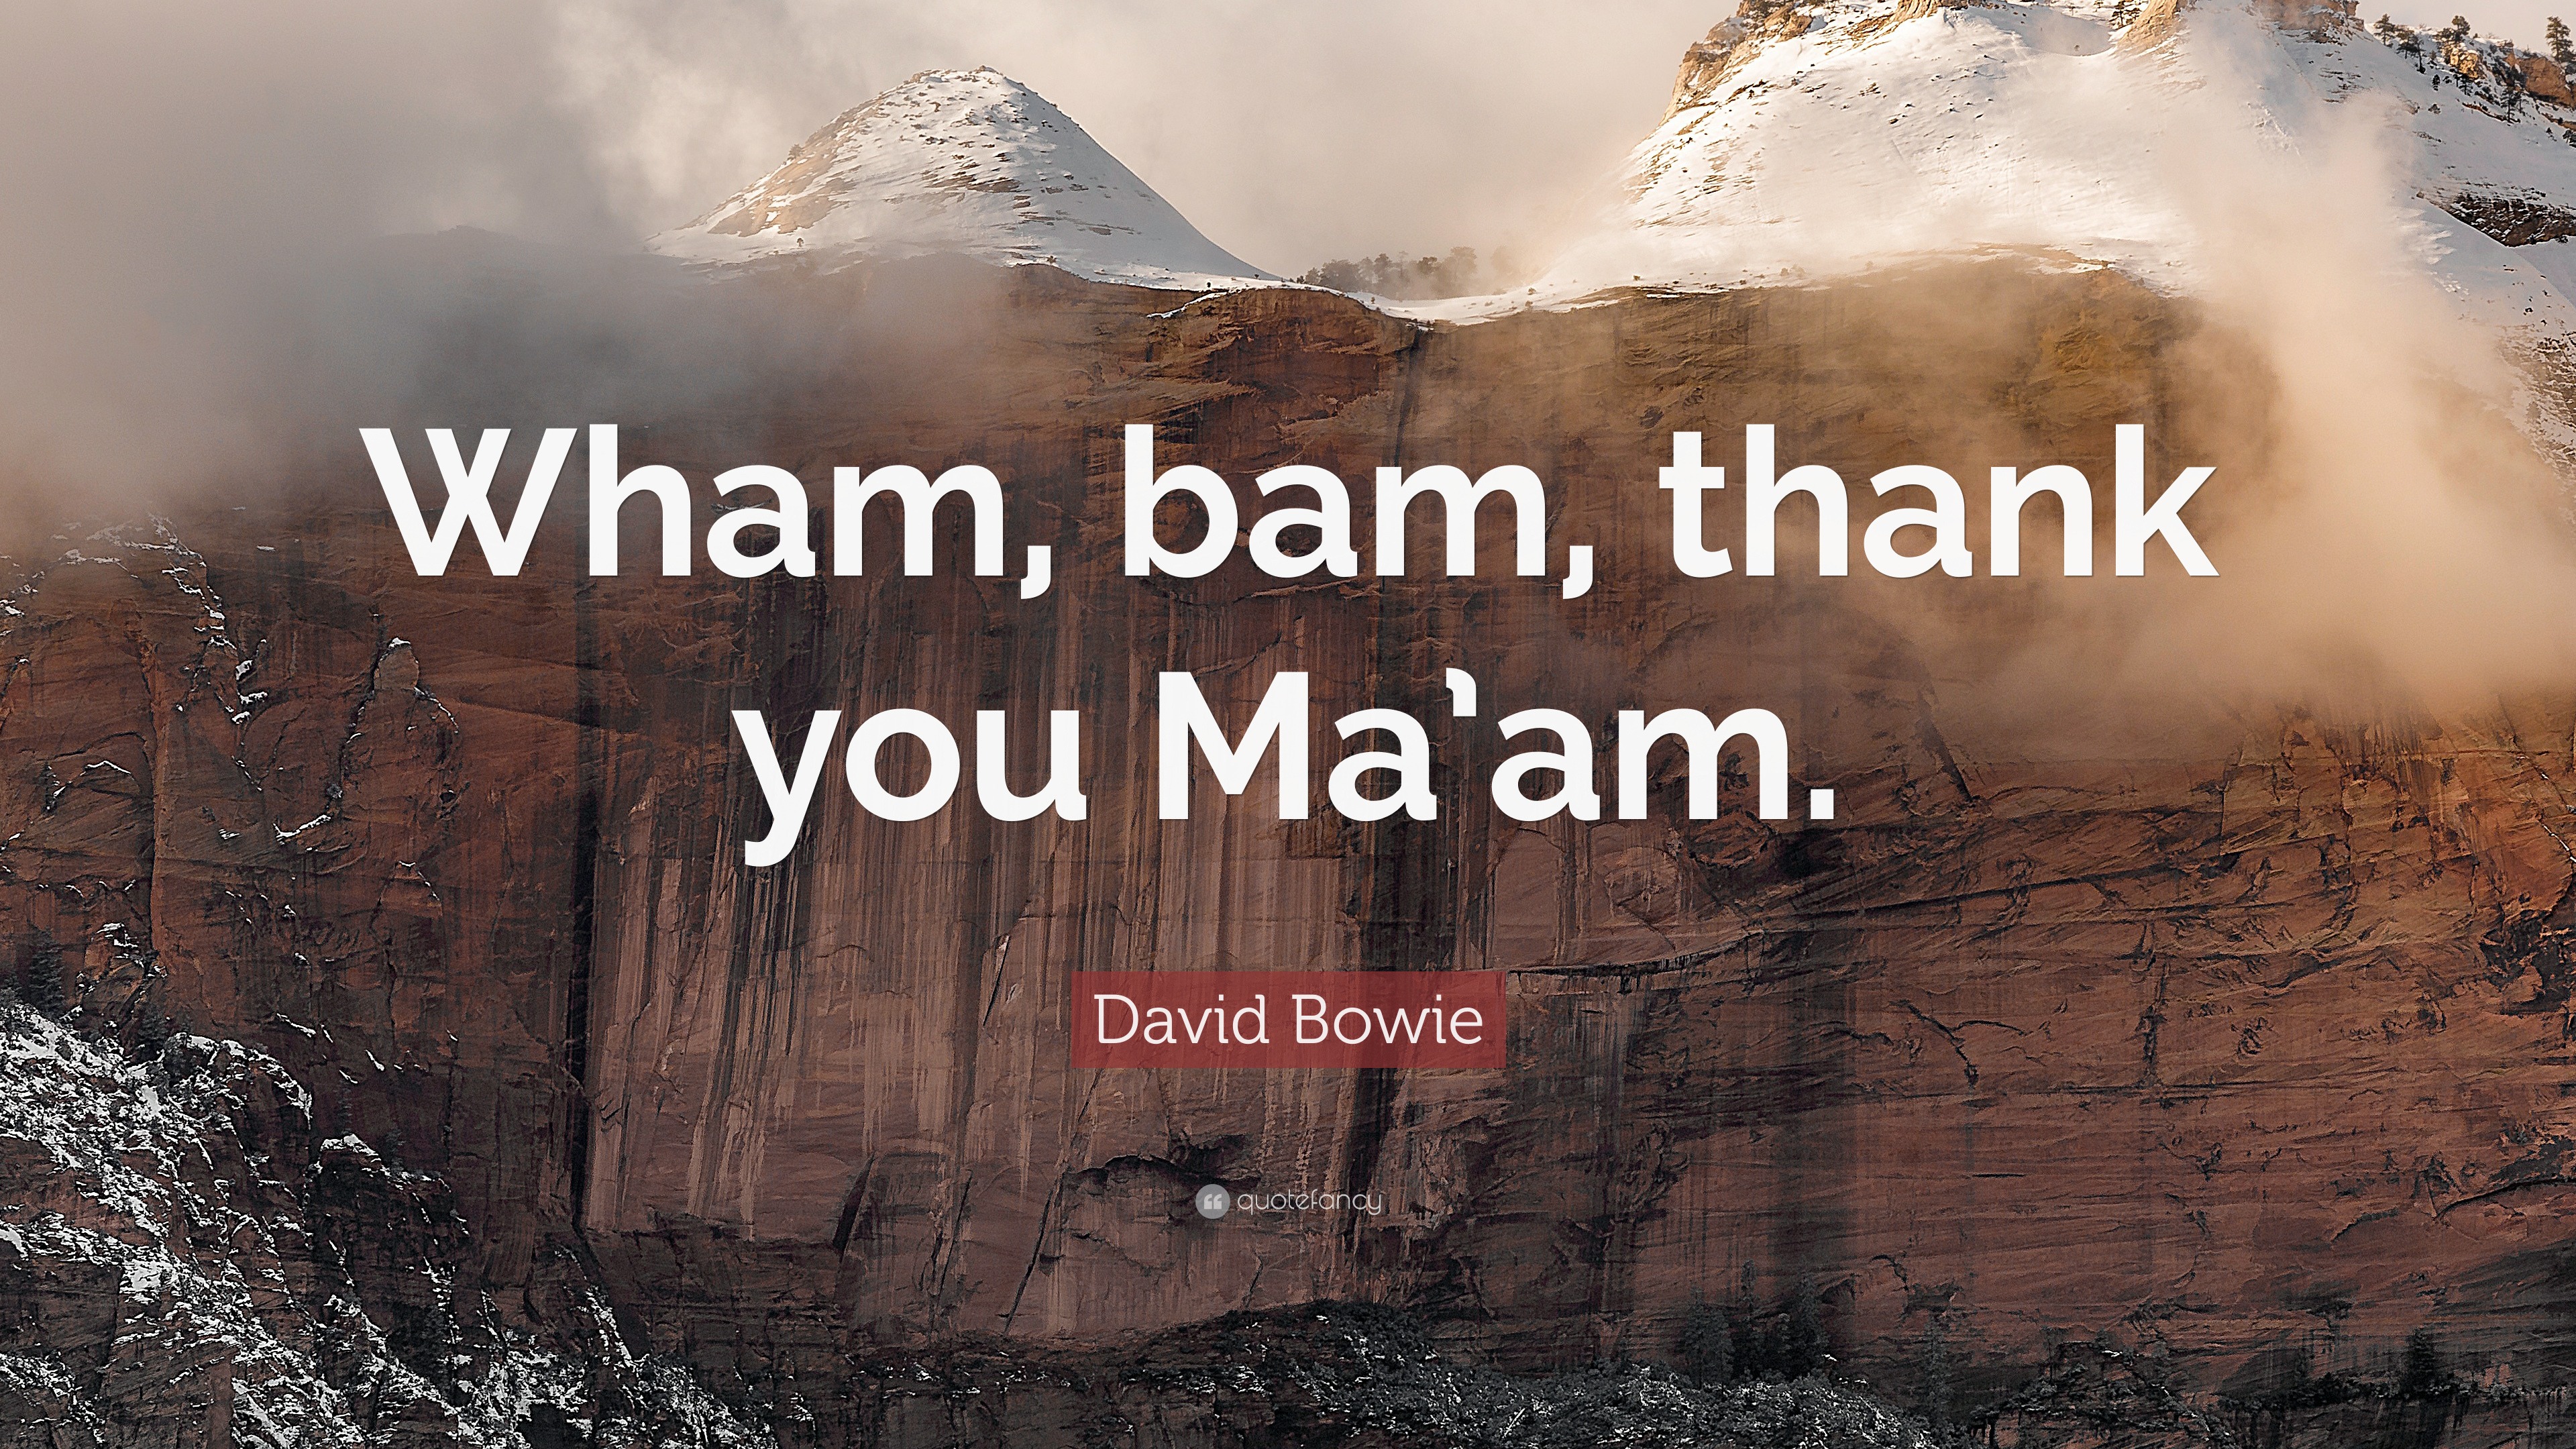 David Bowie Quote “wham Bam Thank You Maam” 7379